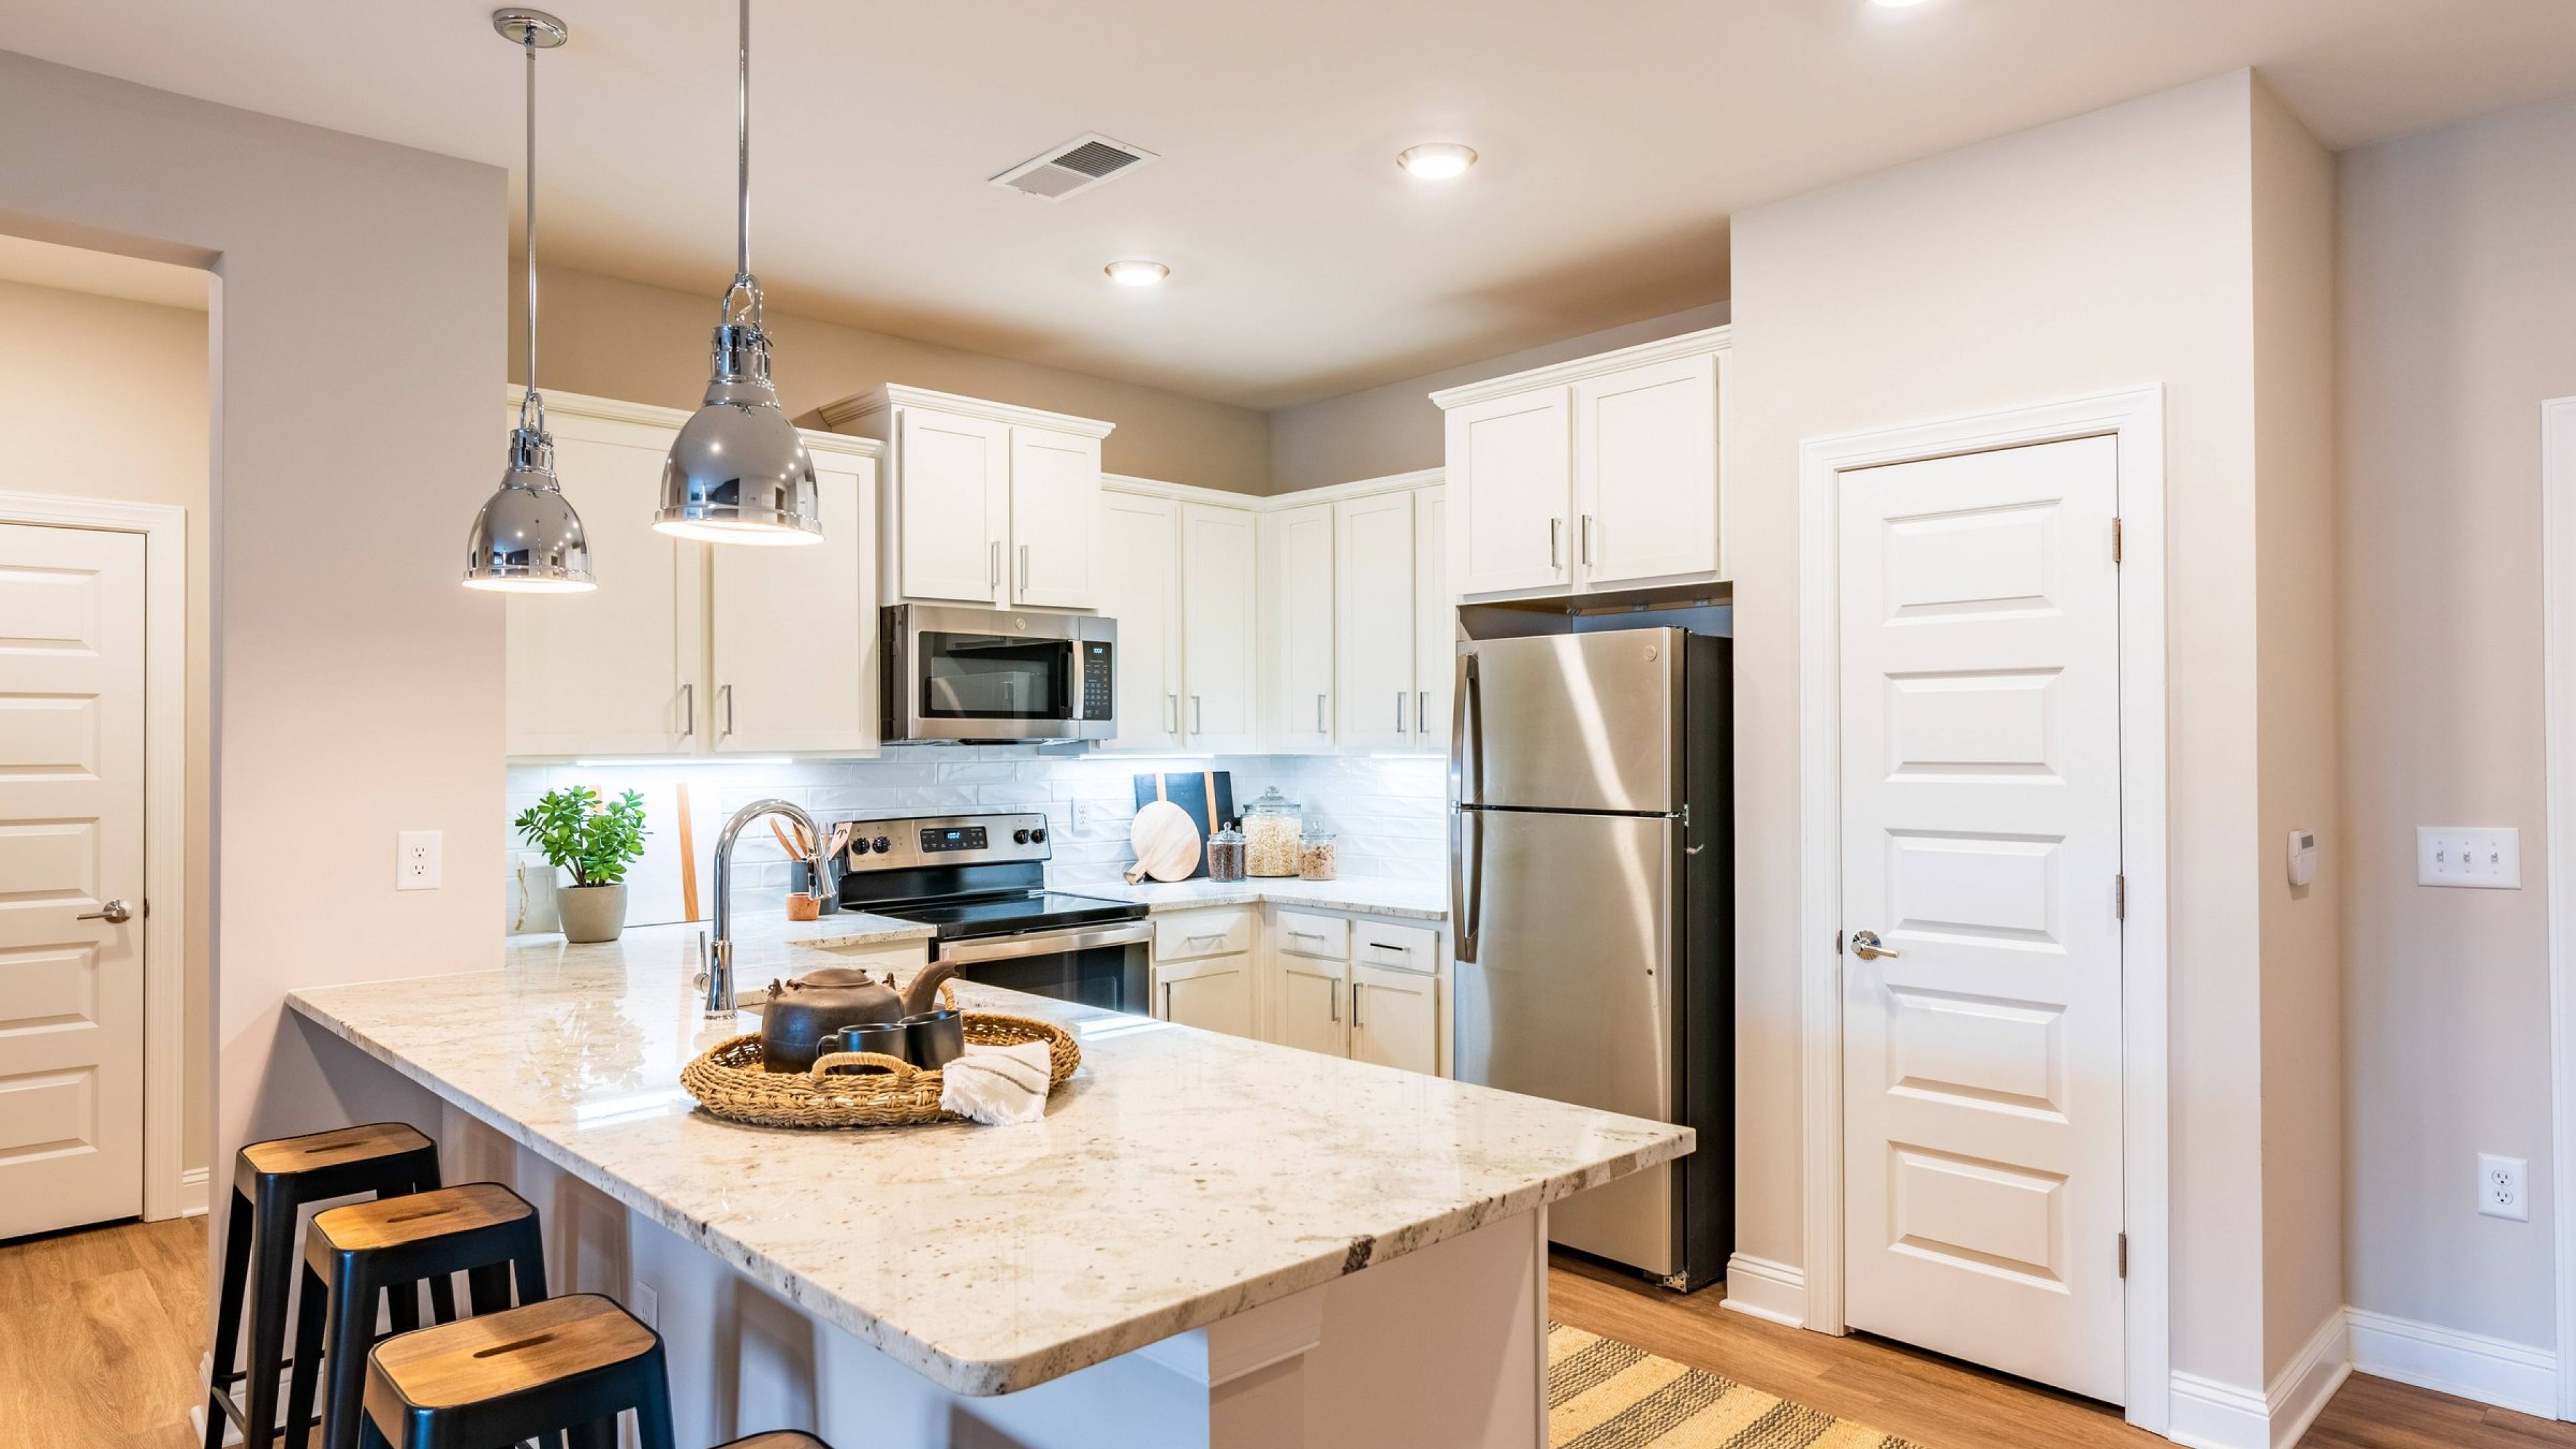 Hawthorne at the Crestbeautiful apartment kitchen with stainless steel appliances, granite countertops, and a large kitchen peninsula